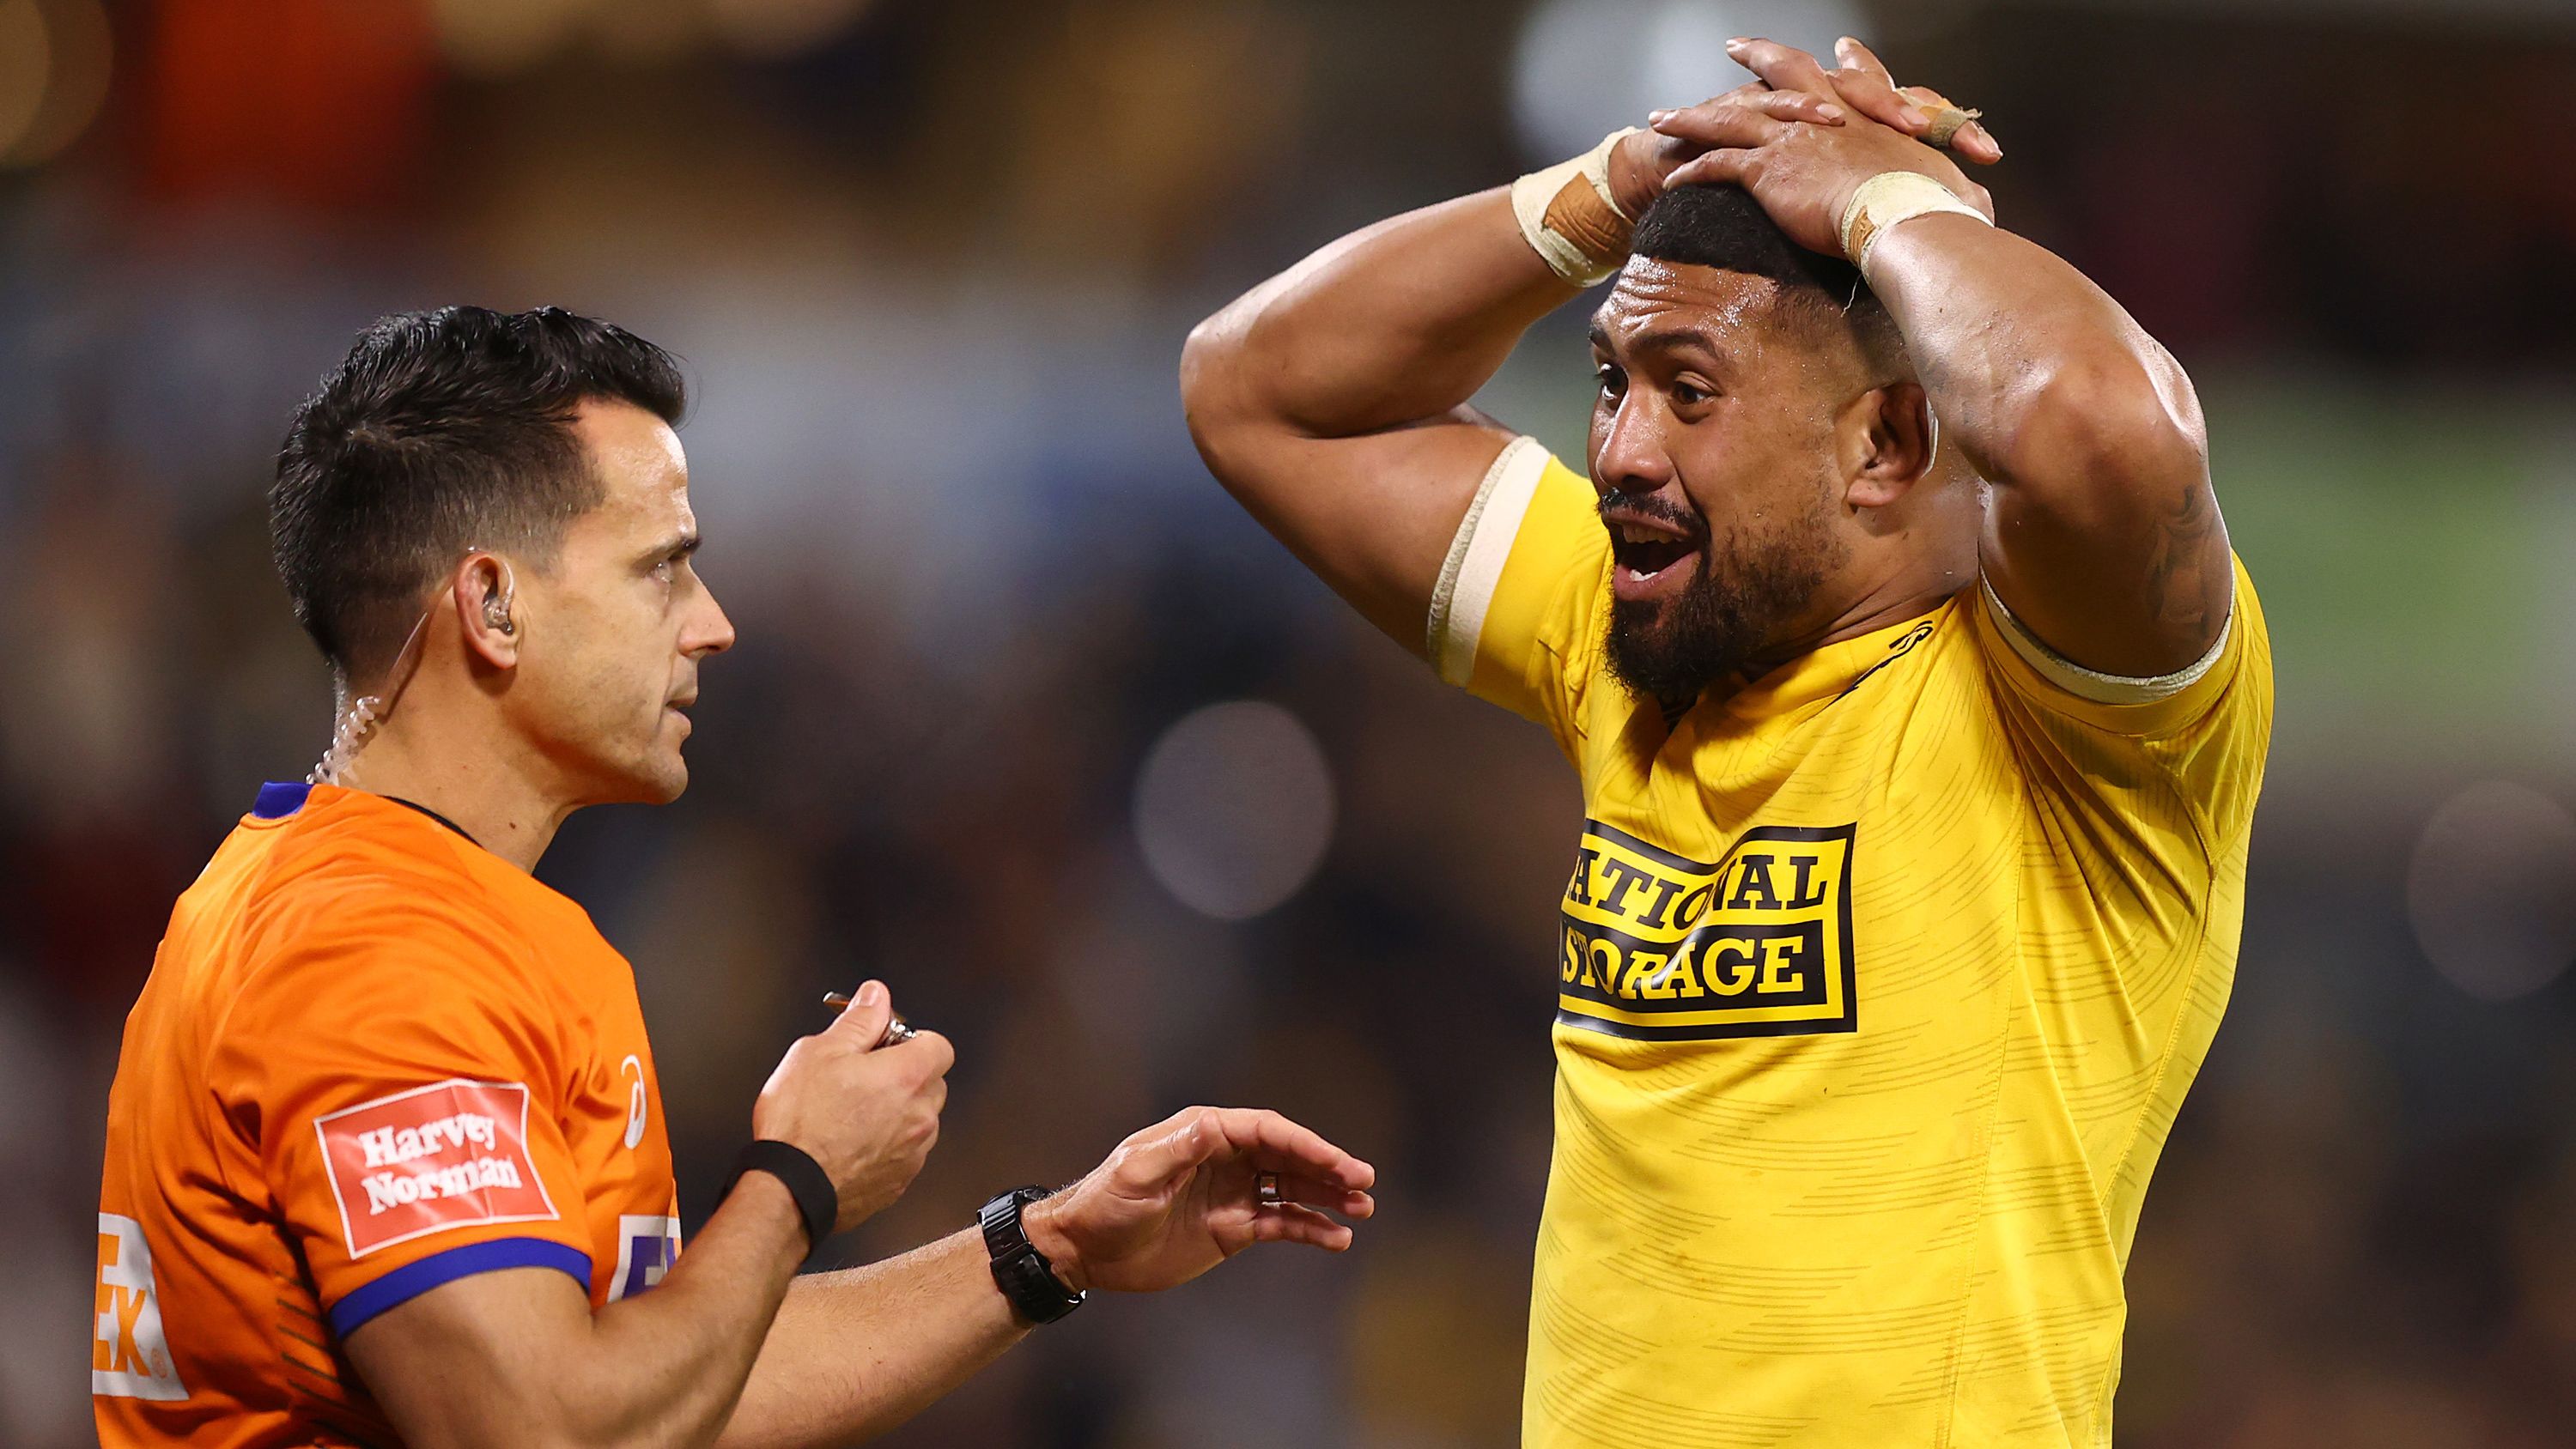 Ardie Savea of the Hurricanes remonstrates with the referee over the final decision.